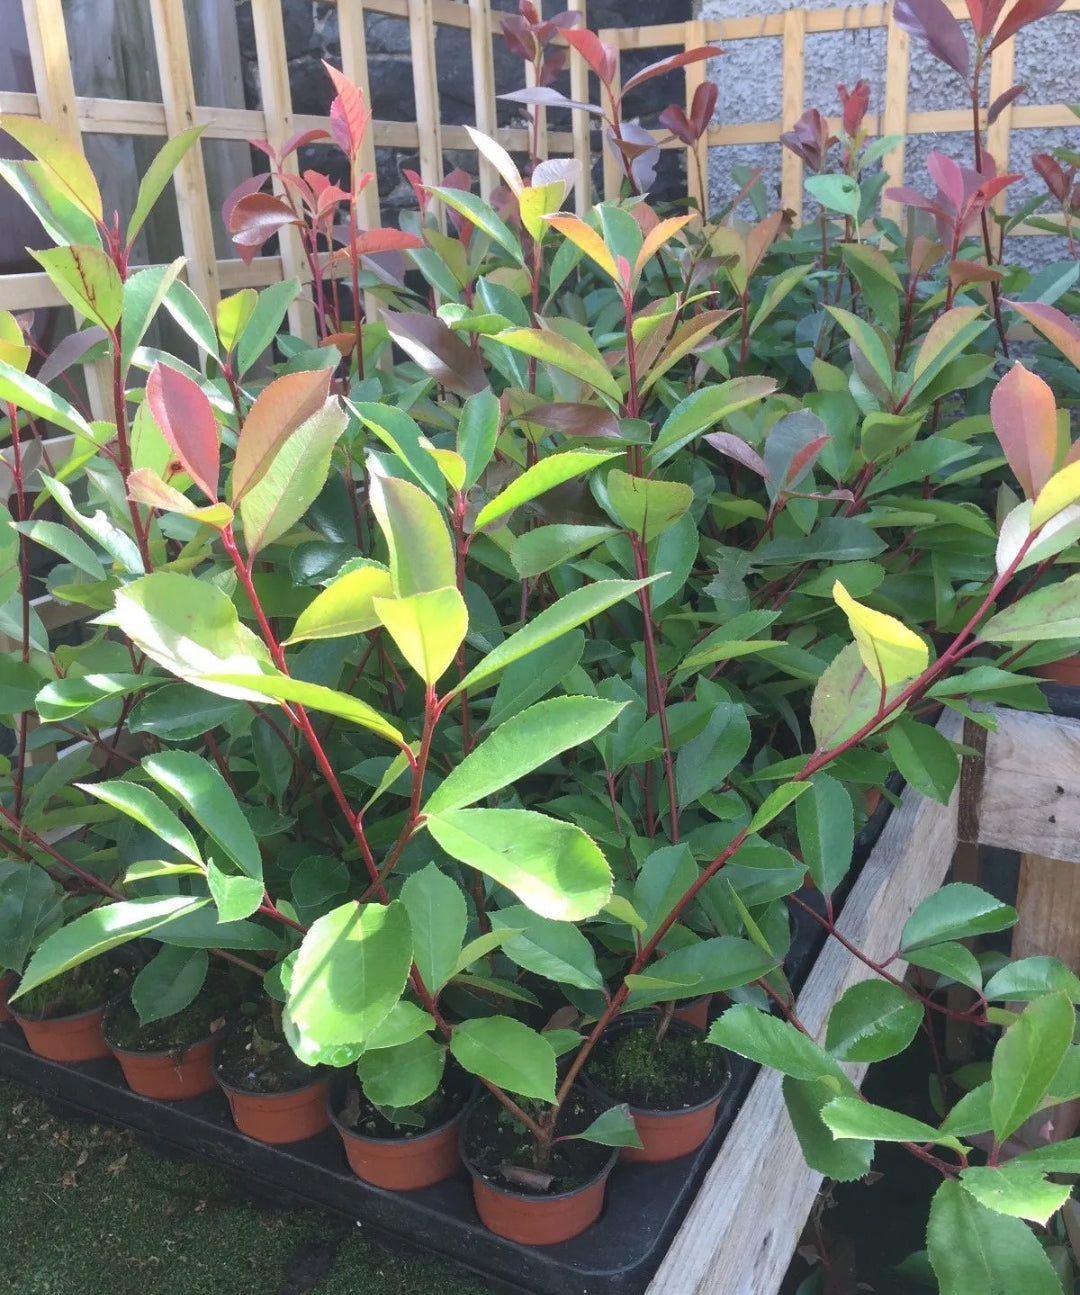 10 Christmas Berry / Photinia fraseri 'Red Robin' 35-45cm Tall grown in 9cm pots